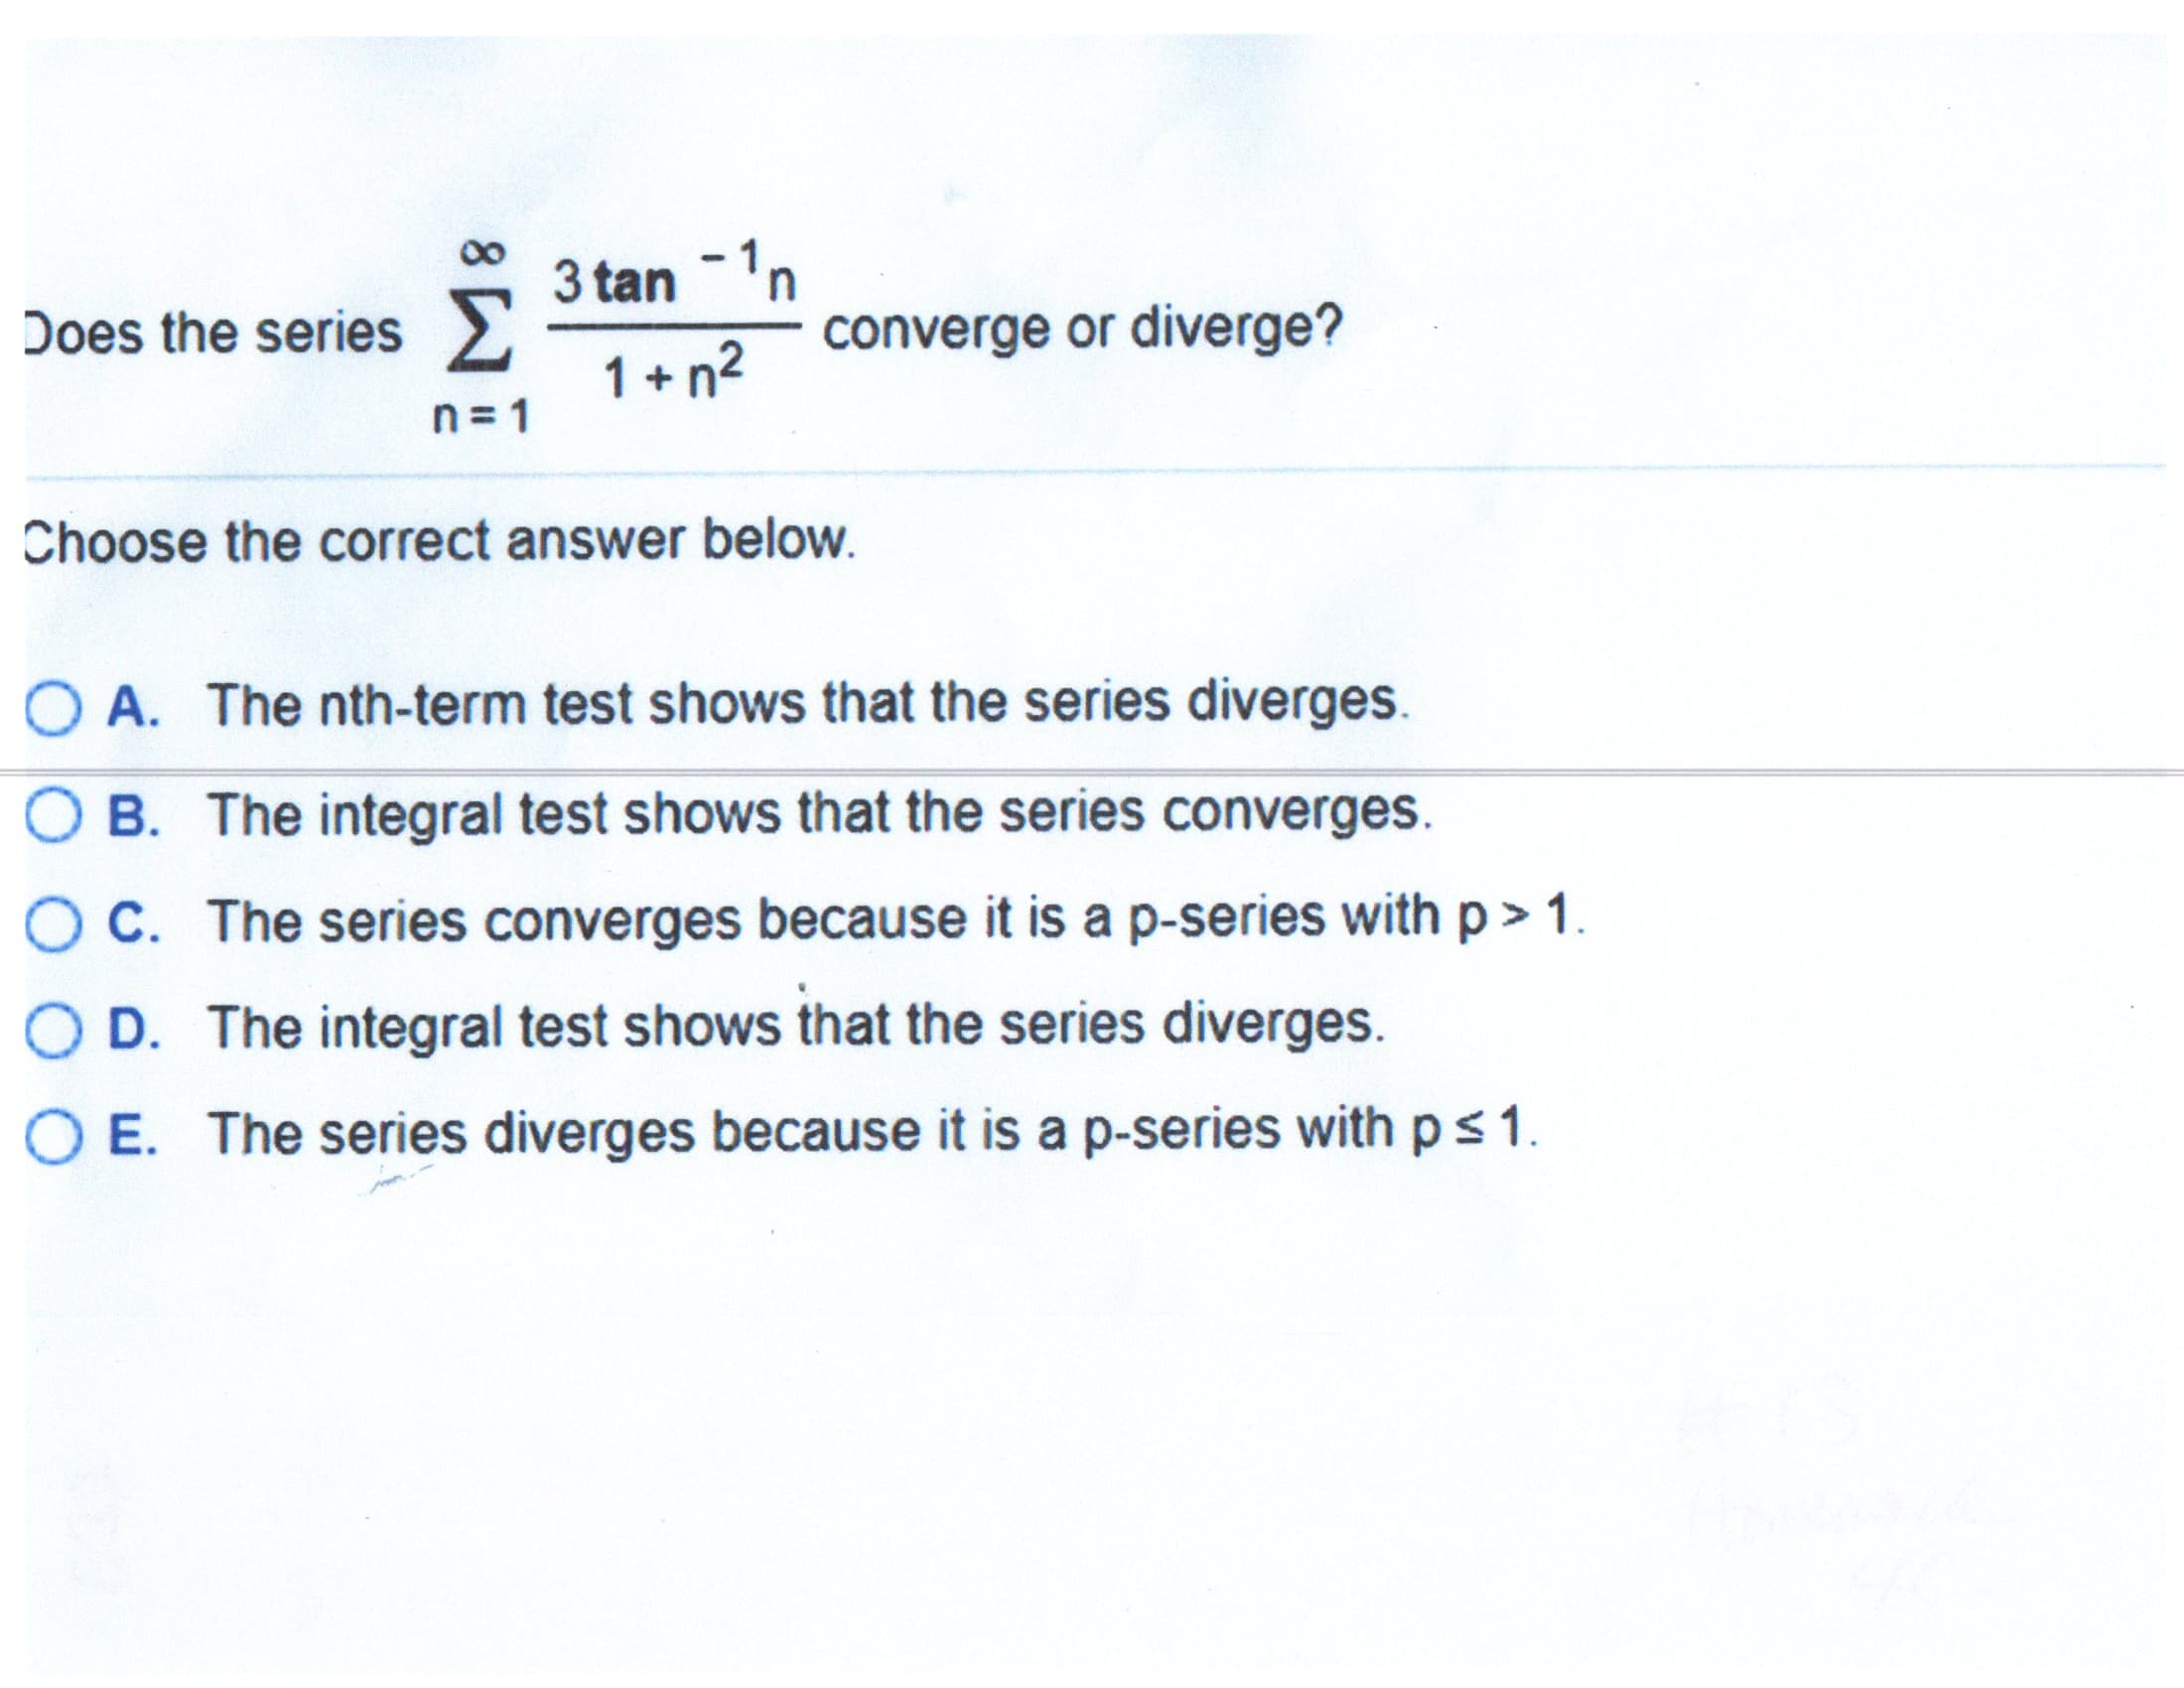 3 tan -'n
1 + n2
Does the series
converge or diverge?
n = 1
Choose the correct answer below.
OA. The nth-term test shows that the series diverges.
OB. The integral test shows that the series converges.
OC. The series converges because it is a p-series with p> 1.
O D. The integral test shows that the series diverges.
OE. The series diverges because it is a p-series with ps1.
